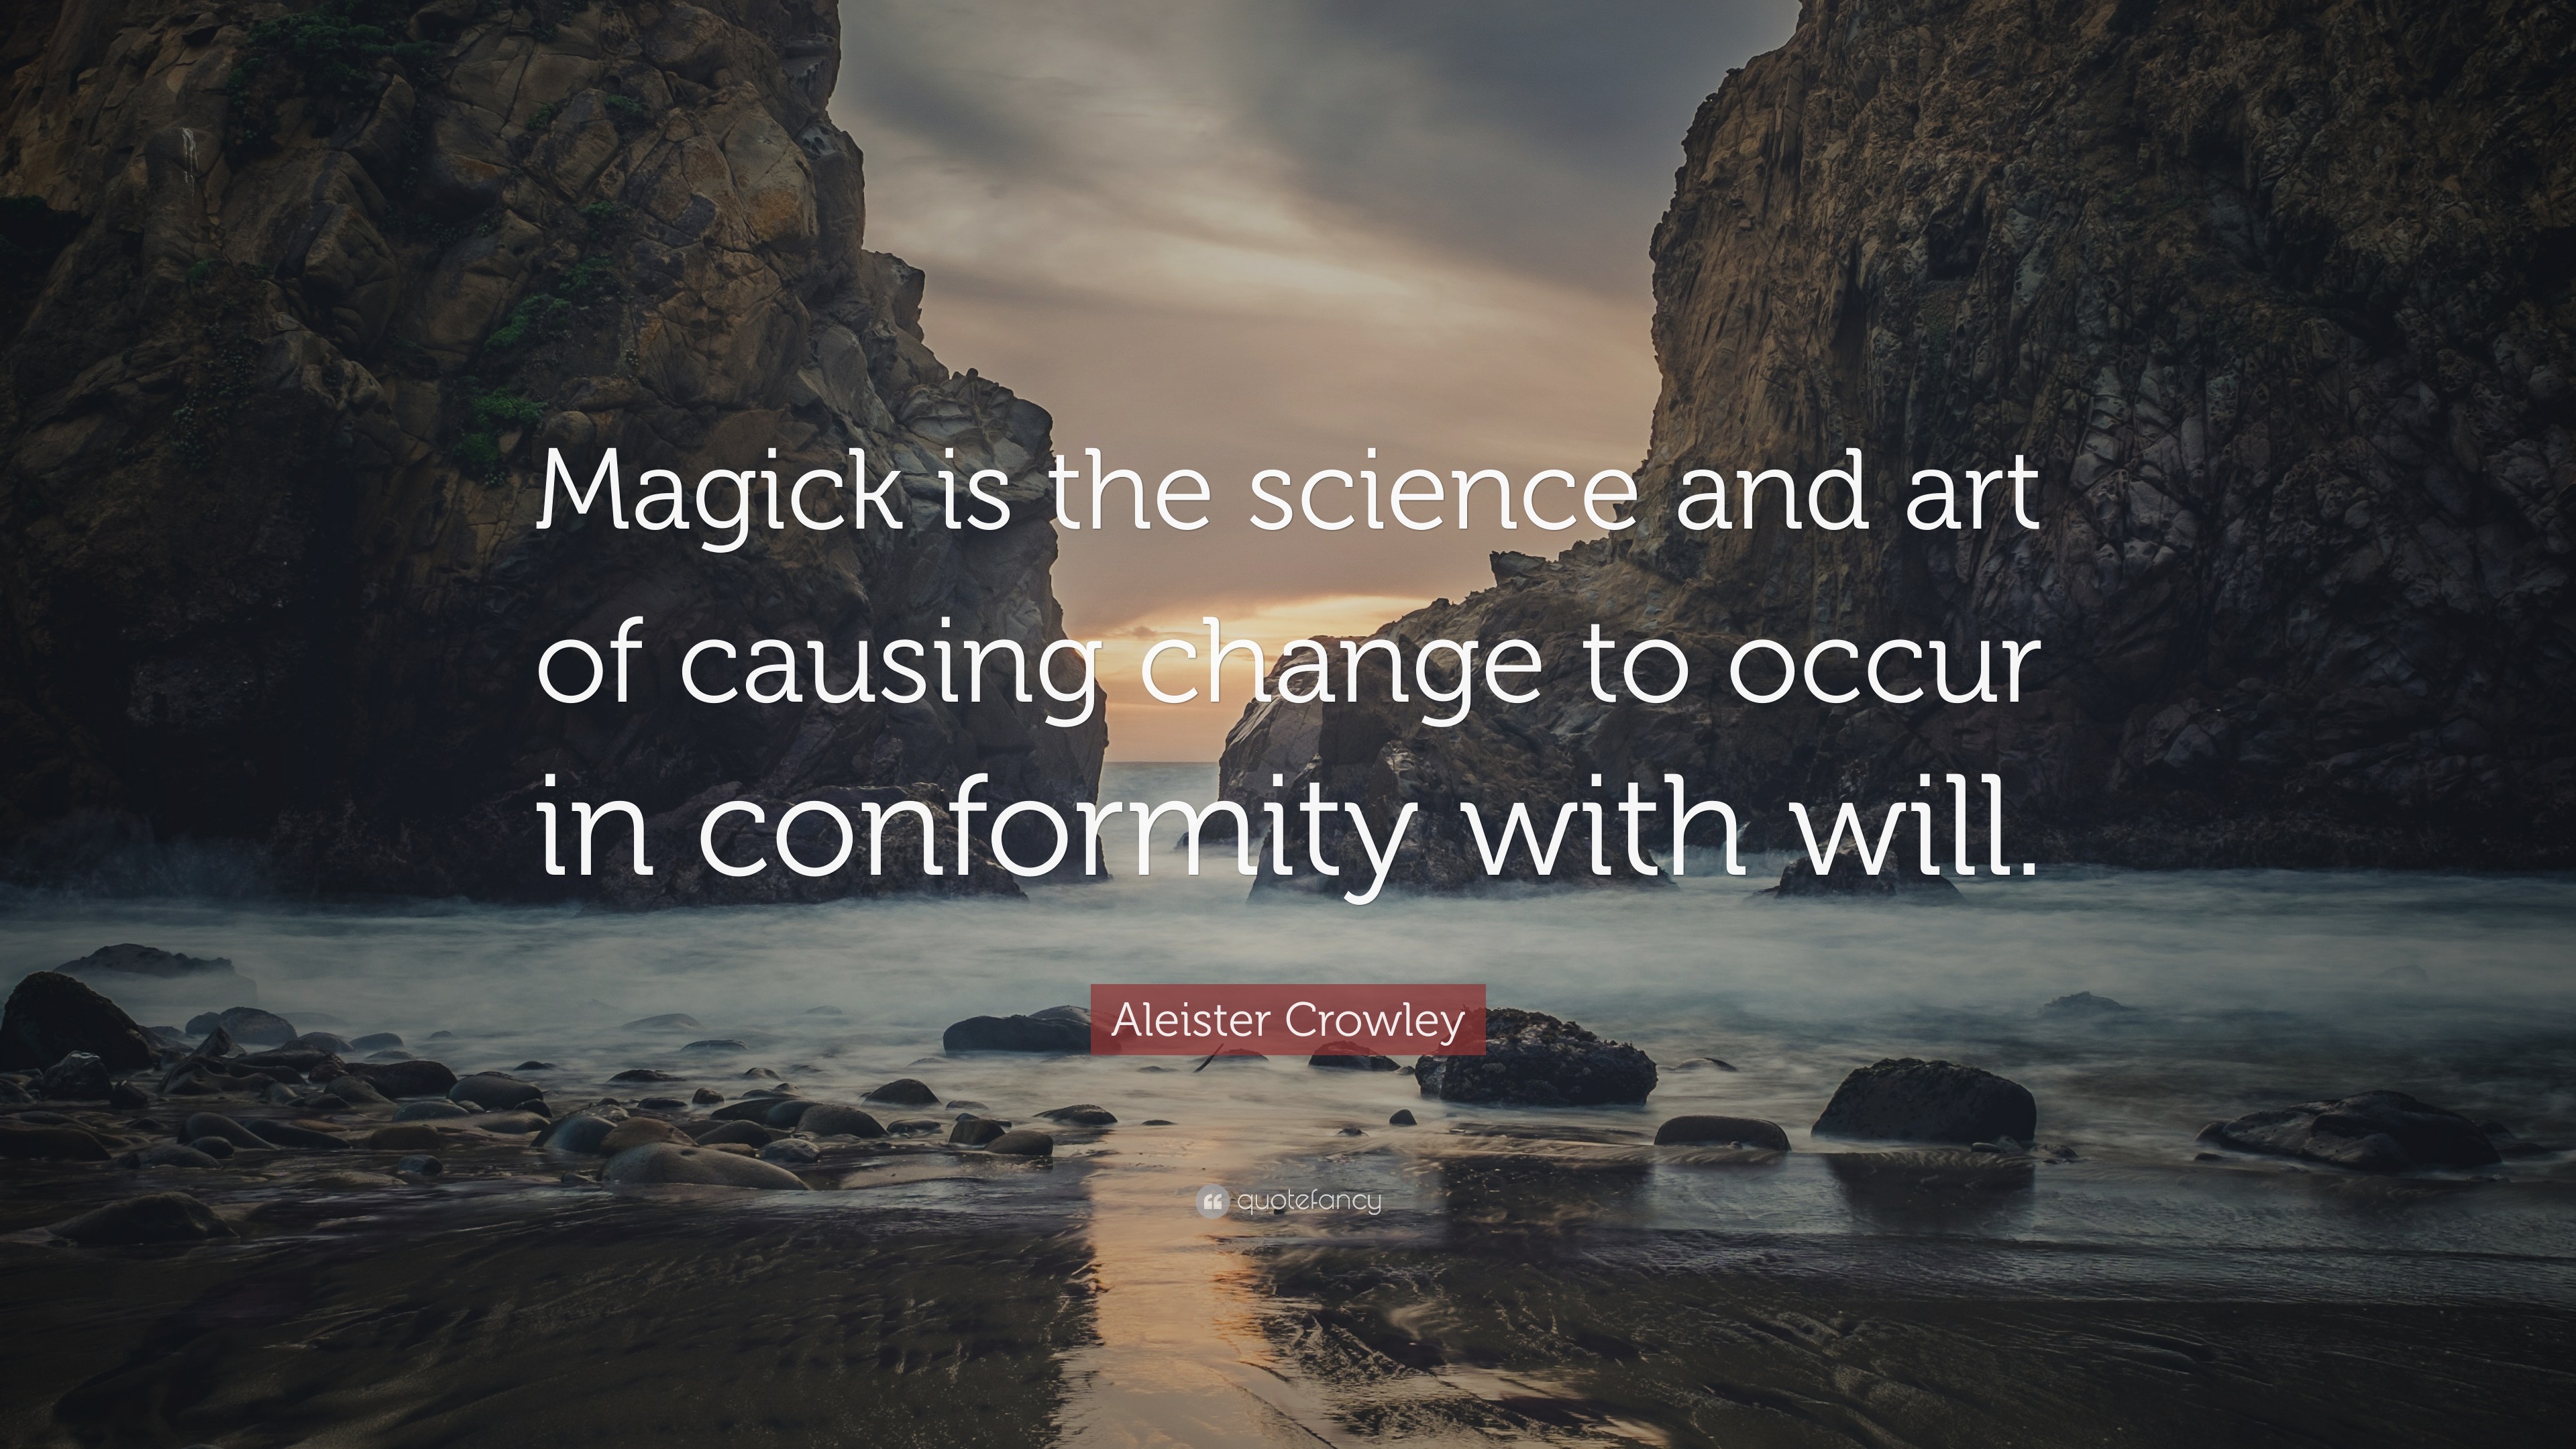 Aleister Crowley Quote: “Magick is the science and art of causing ...